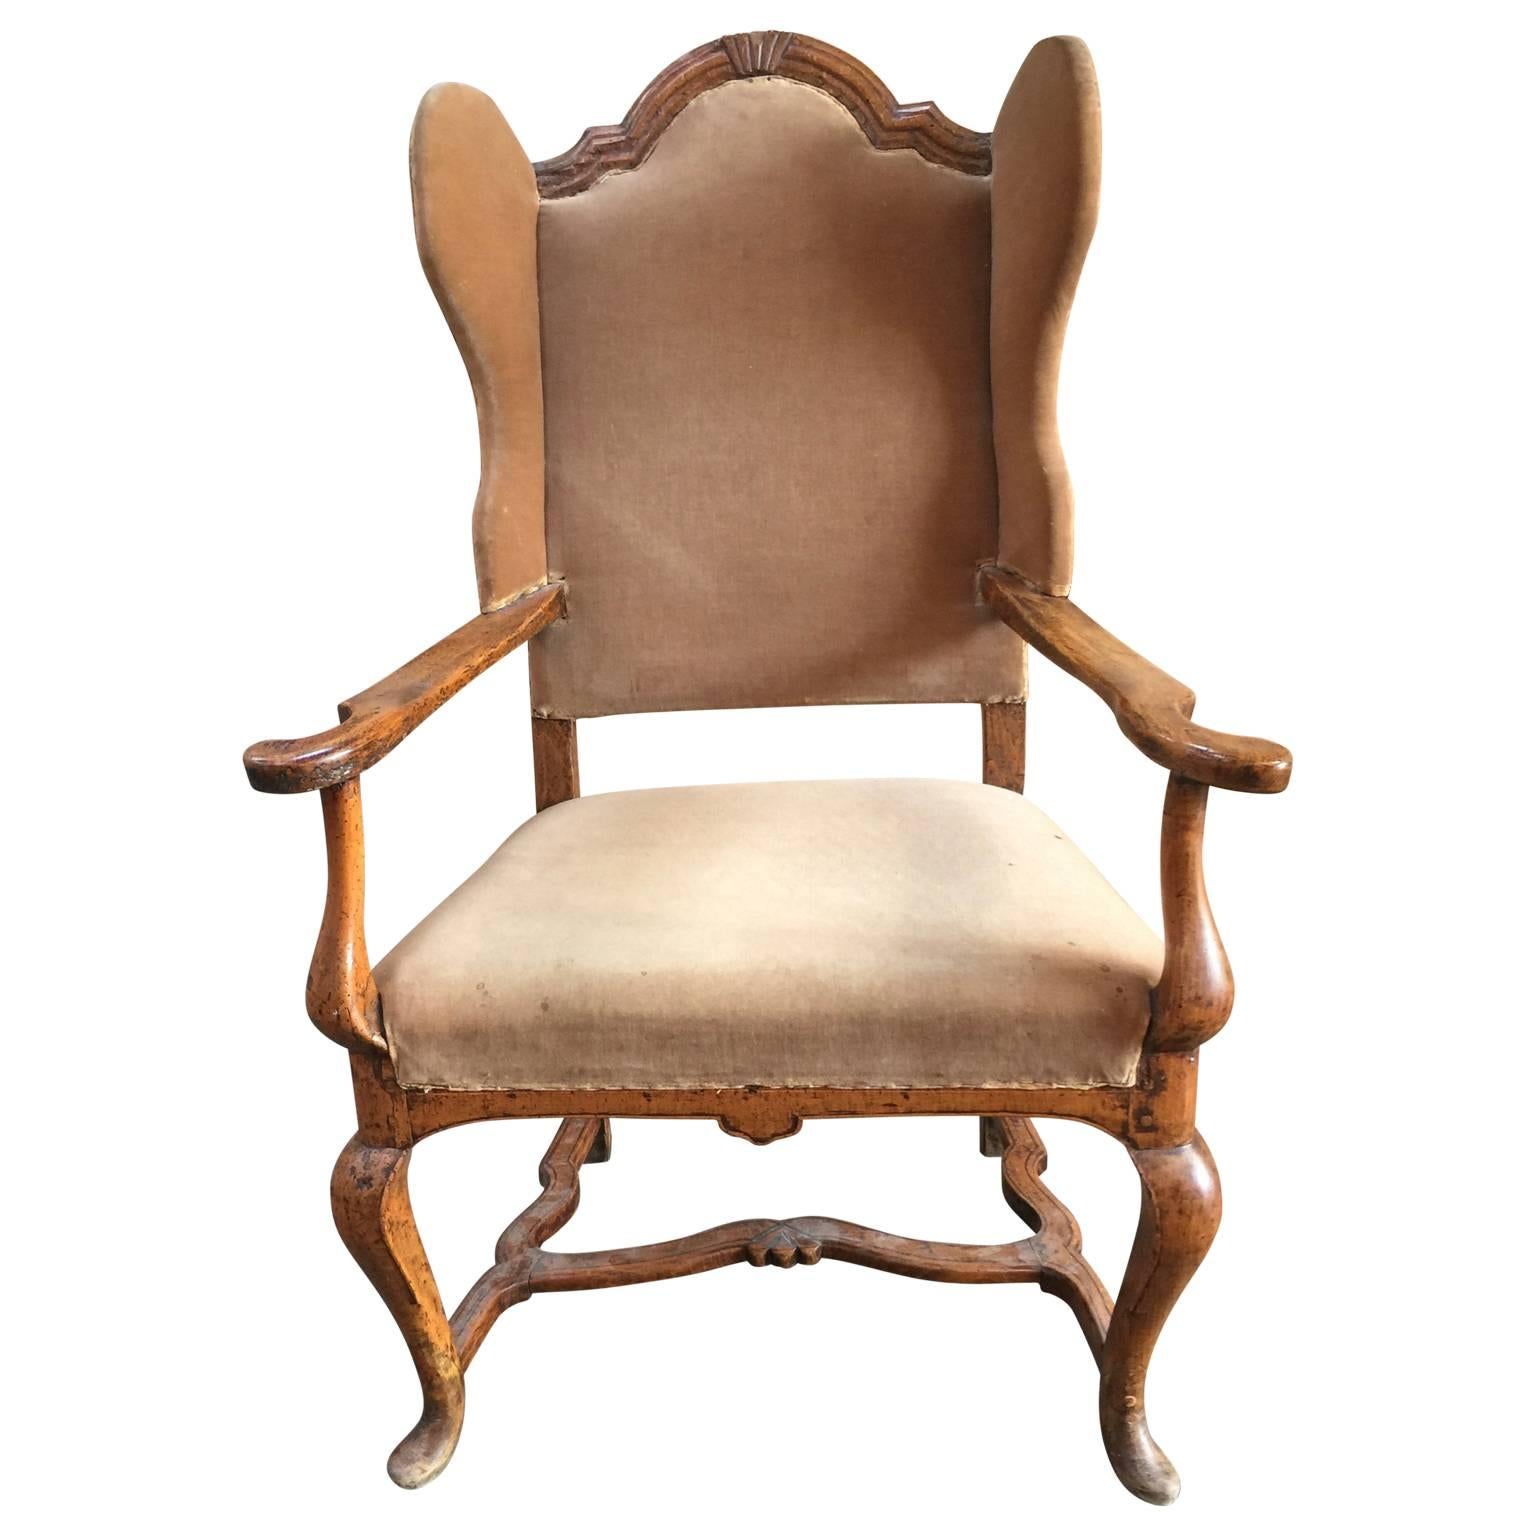 Large 18th century wingback armchair in oak, and with open-arm rests.